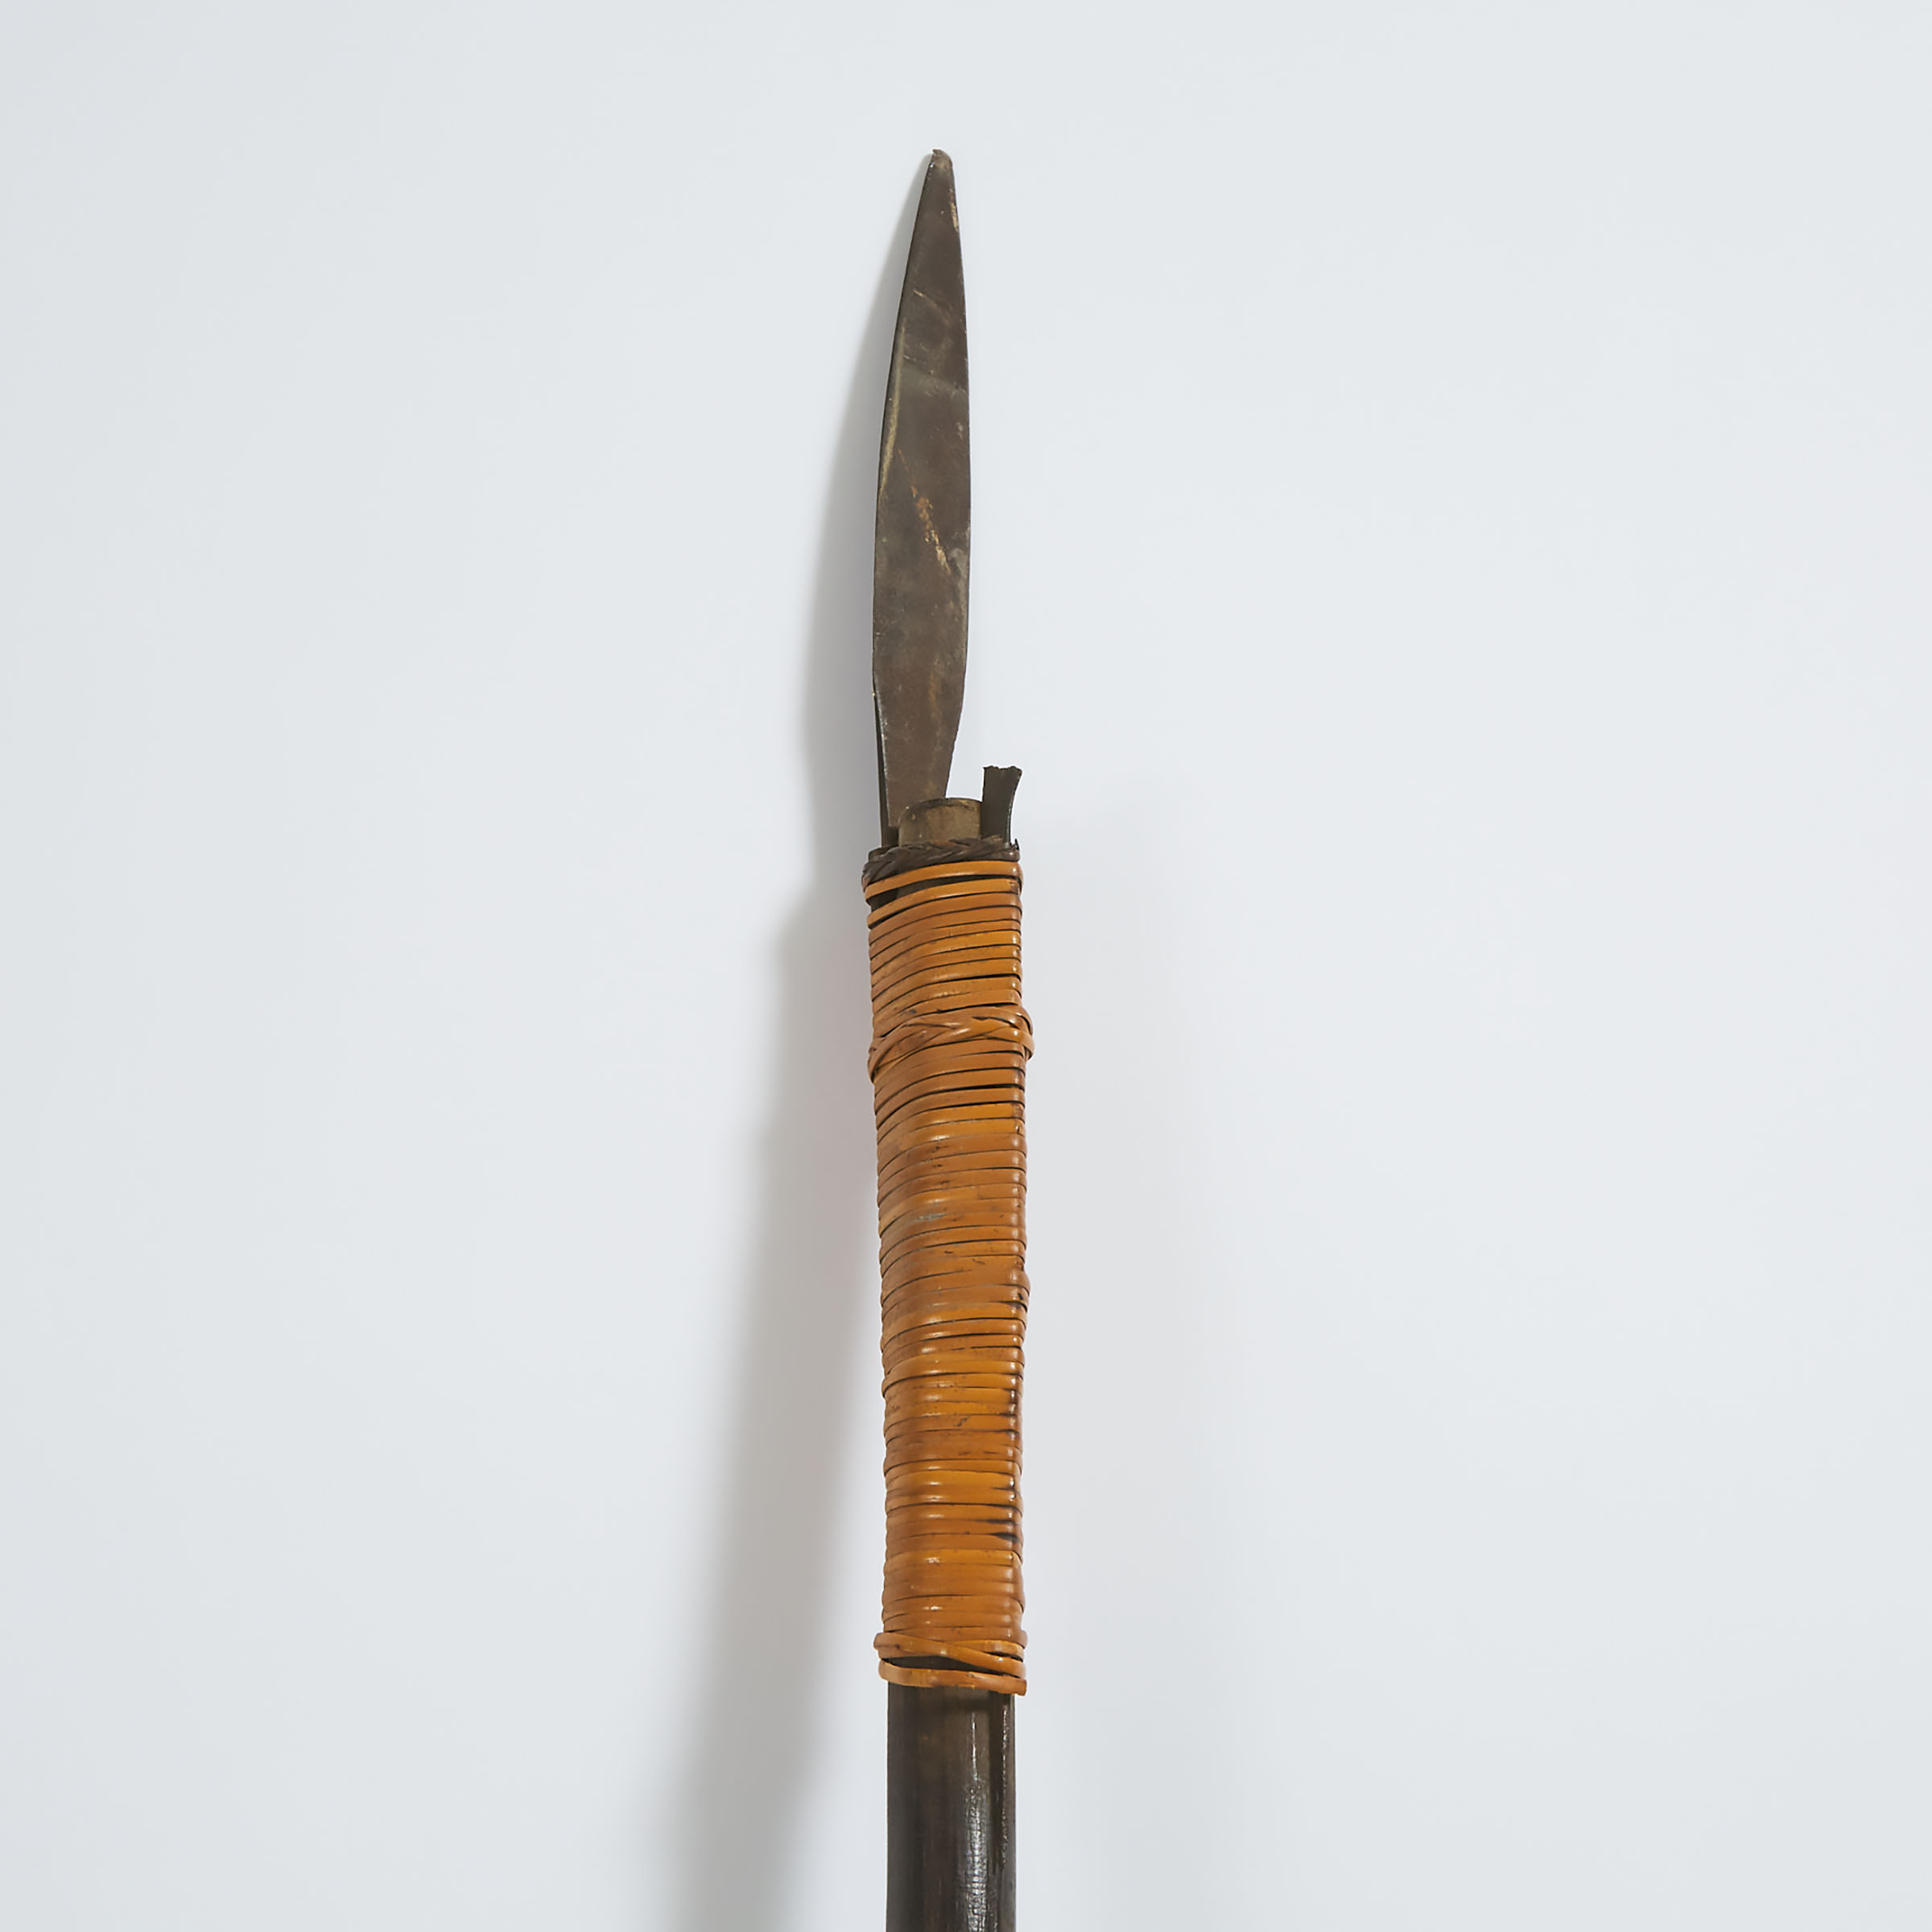 Dayak Sumpit Spear/Blowgun, Borneo, Indonesia, early to mid 20th century 